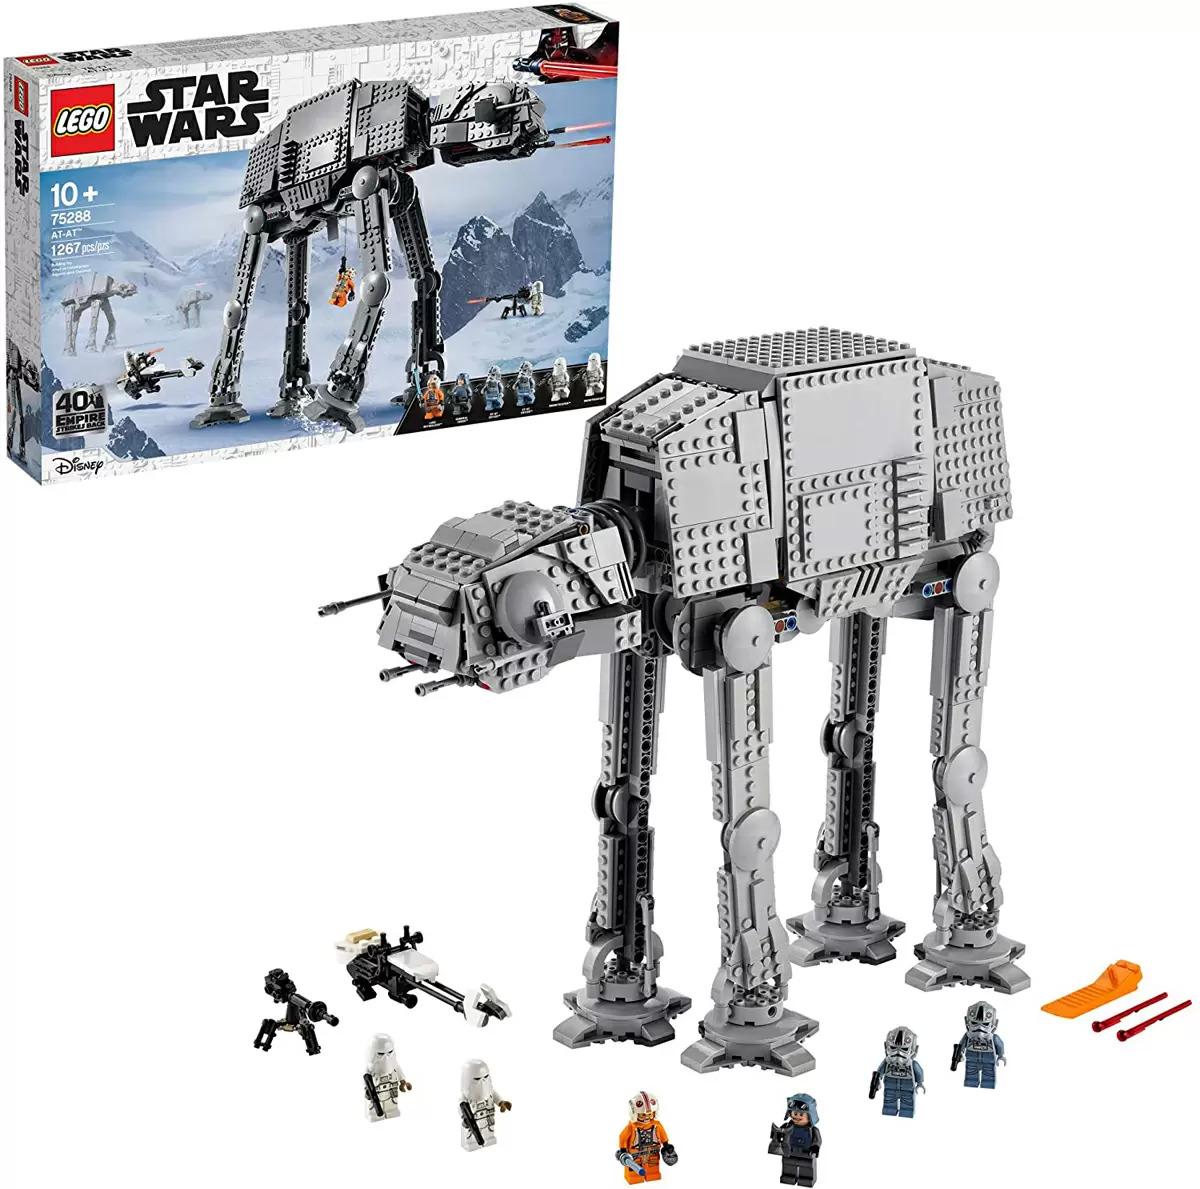 1267-Piece LEGO Star Wars AT-AT Building Kit for $127.99 Shipped